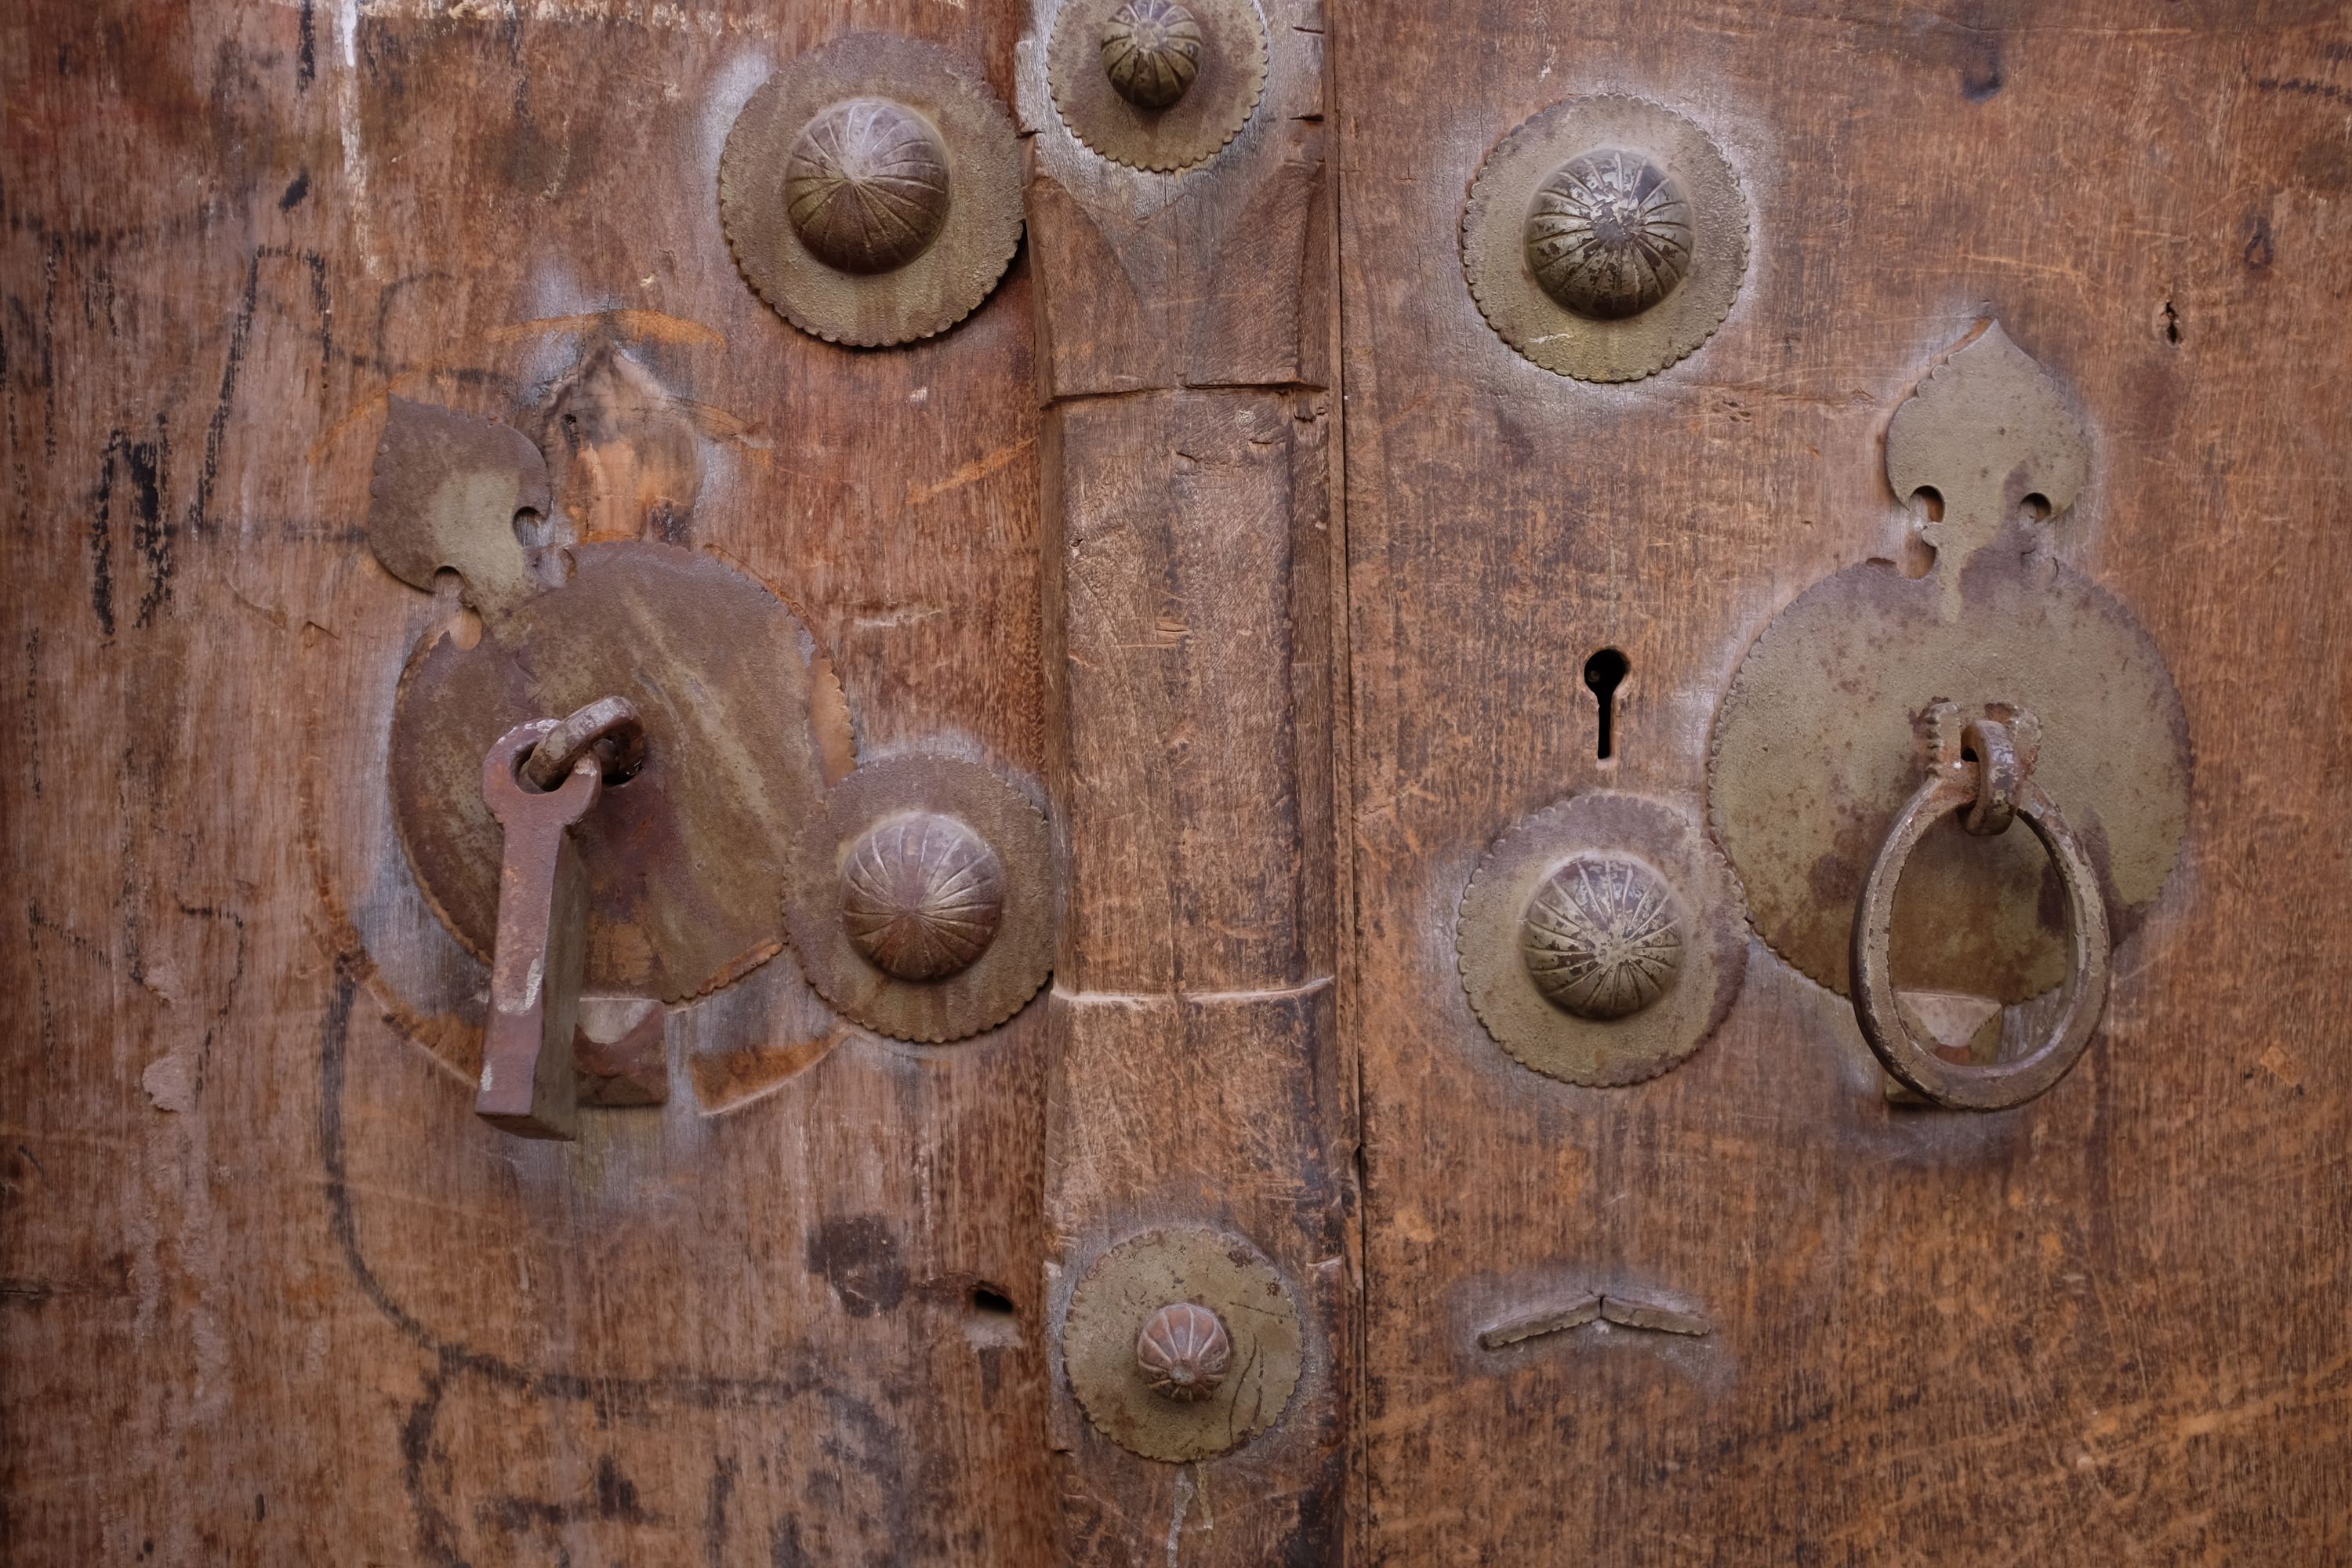 A straight and a circular door knocker on a door that looks very old.